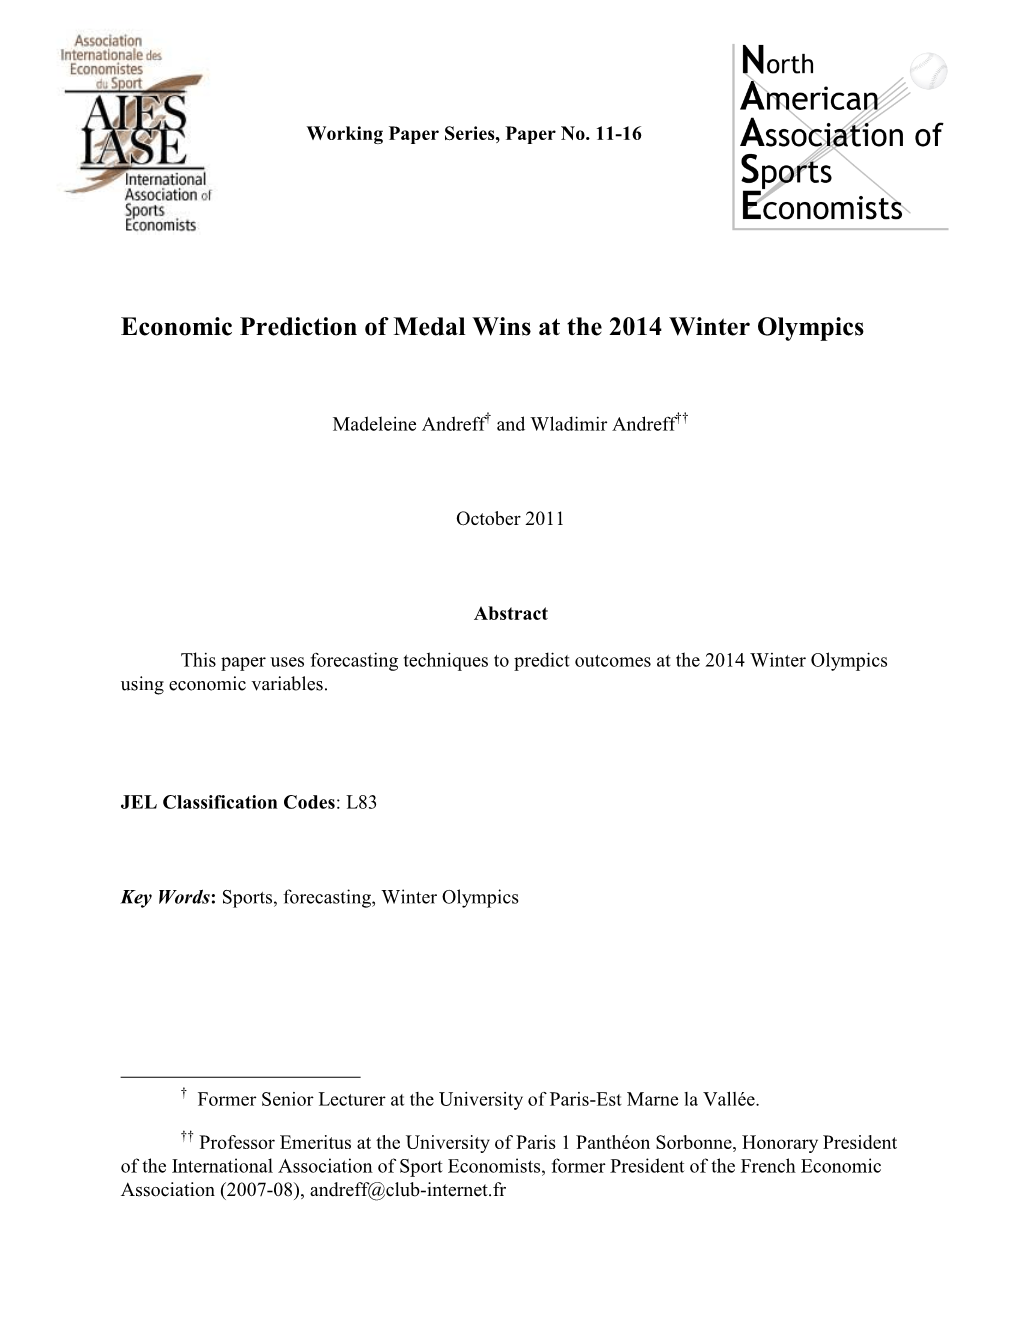 Economic Prediction of Medal Wins at the 2014 Winter Olympics